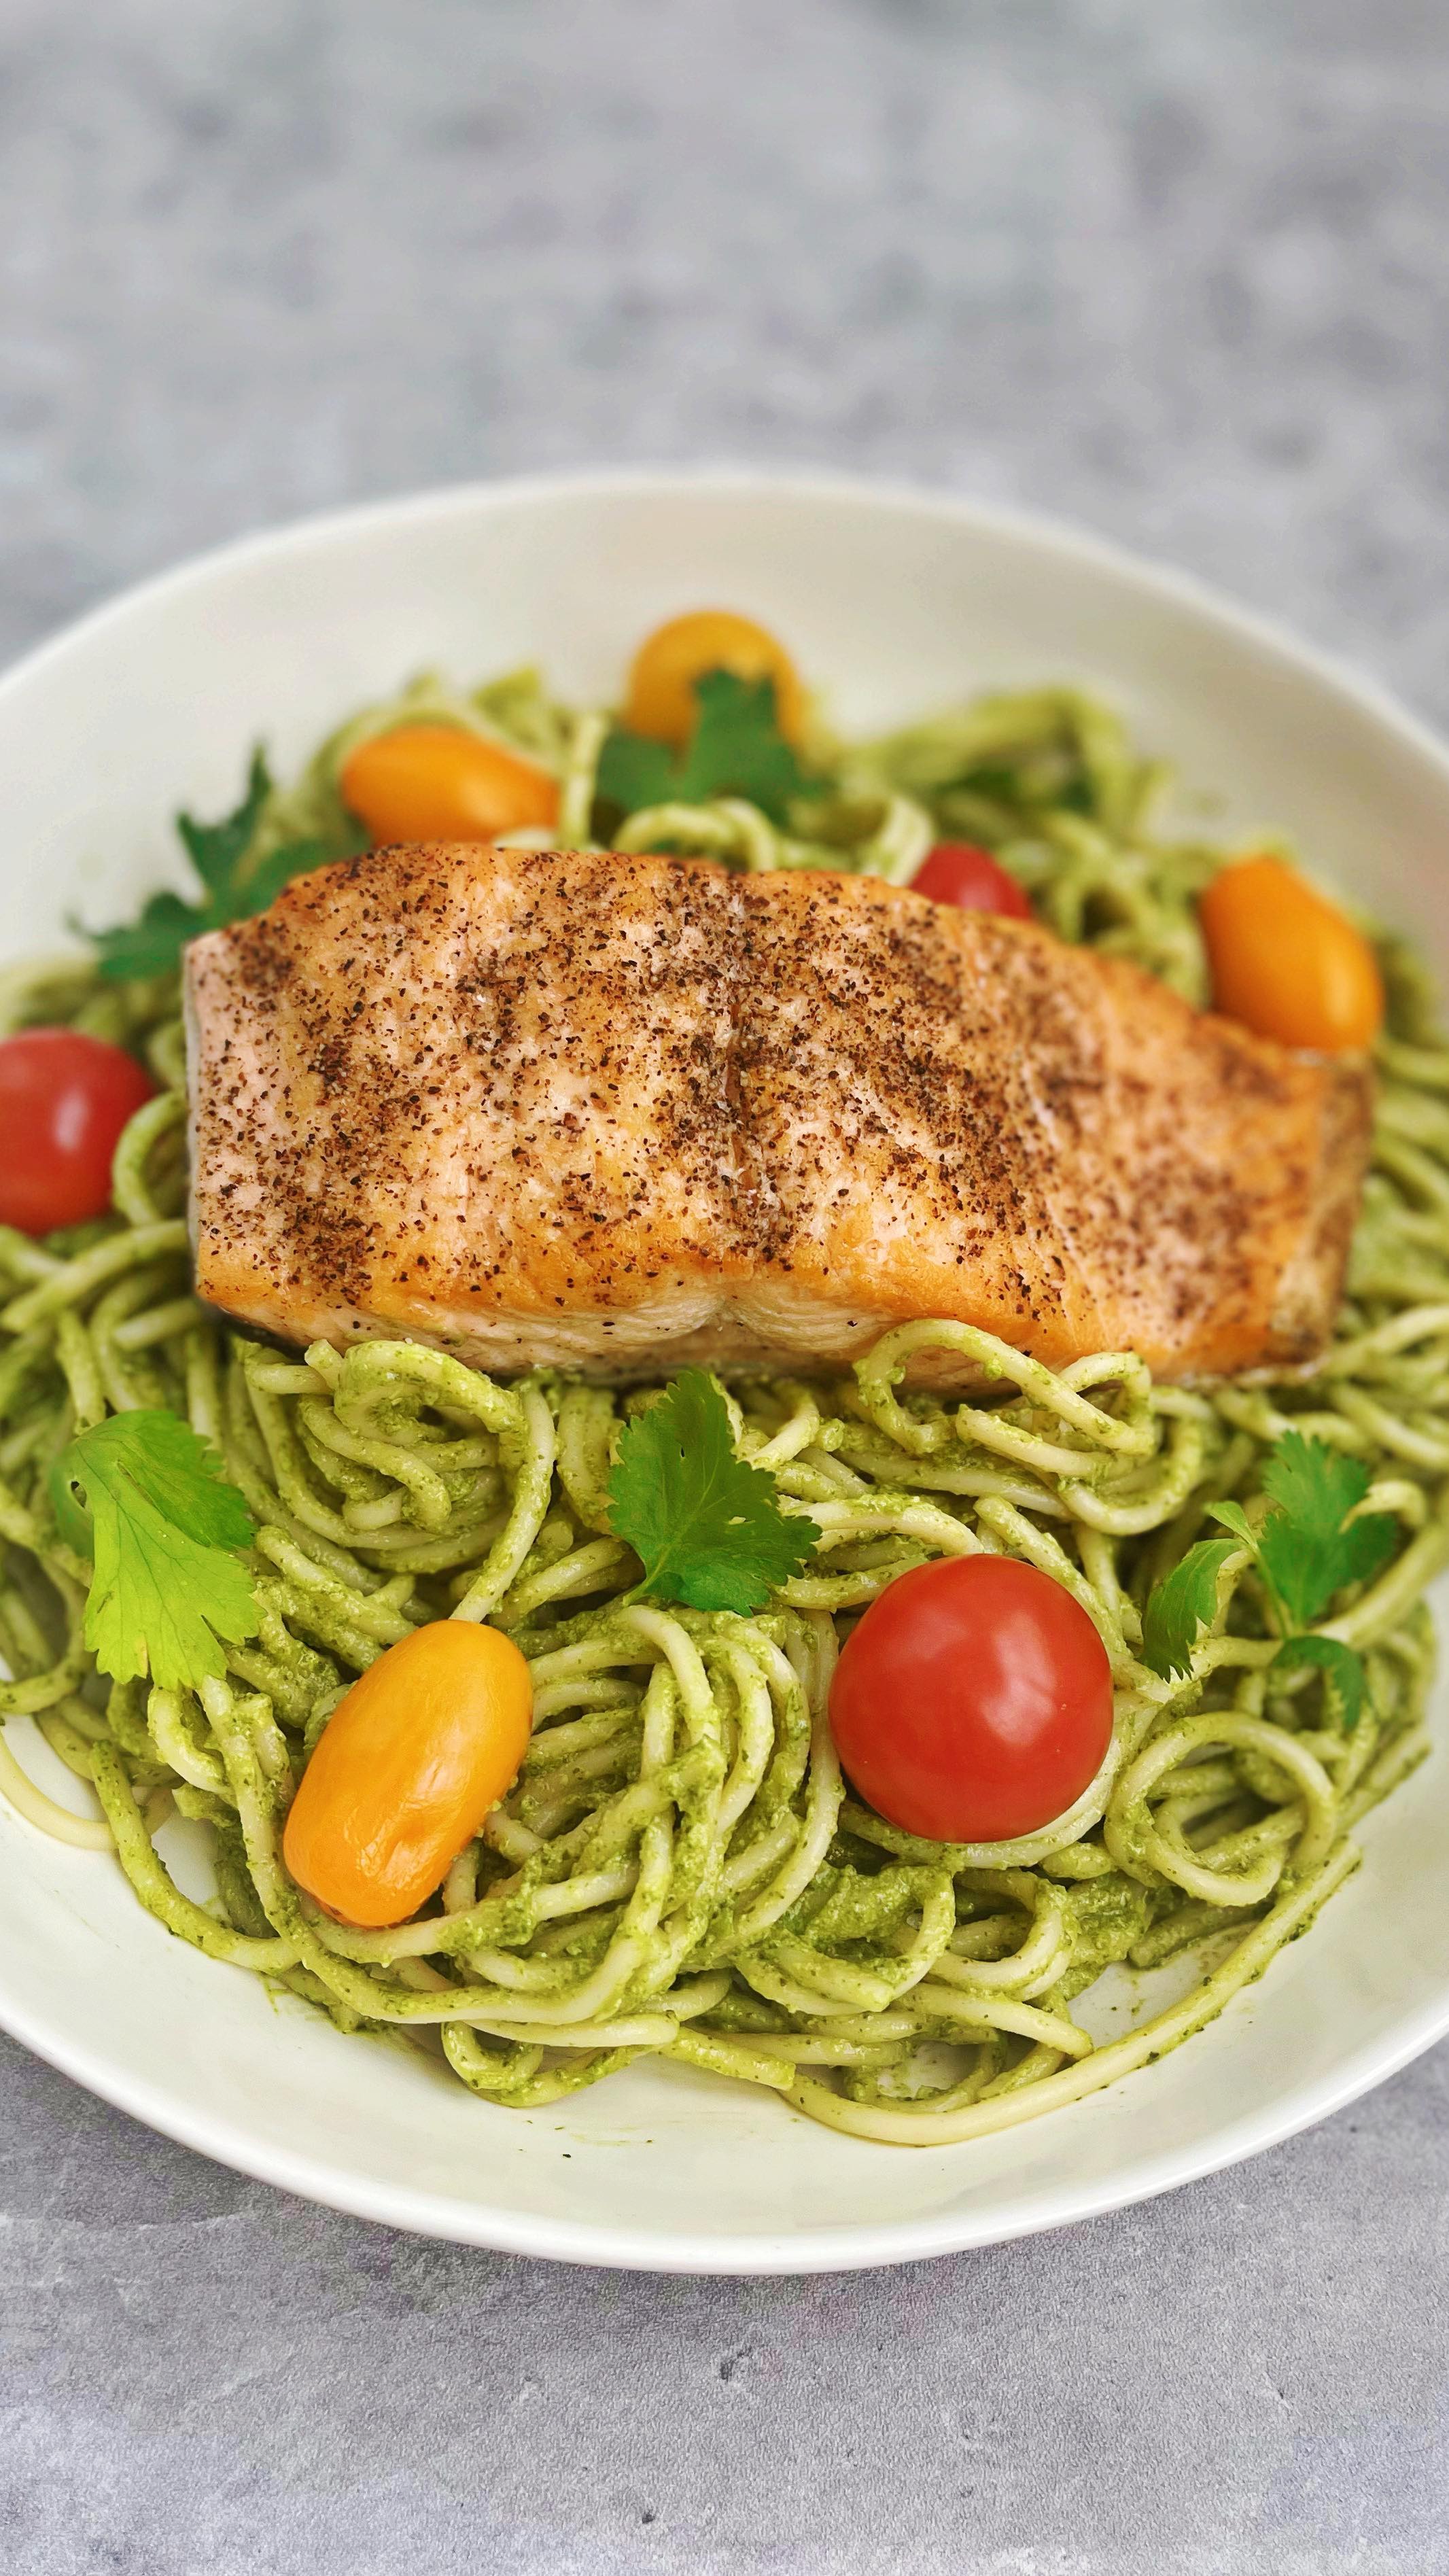 Avocado Pesto Pasta is going viral for a reason (maybe bc Zendaya talked about it during her @vogueitalia interview) and it’s so easy to make! Full recipe is linked in the bio, it took less than 10 minutes to make and was the perfect healthy and refreshing summer pasta! #zendaya #avocadopesto #vogueitalia #pestopasta #pestorecipe #summerpasta #pastasalad #summerrecipes #nocookmeals #easydinner #meatlessmonday #pestosauce #pestosalmon #robiproter #dinnerreinvented #foodblogger #momblogger